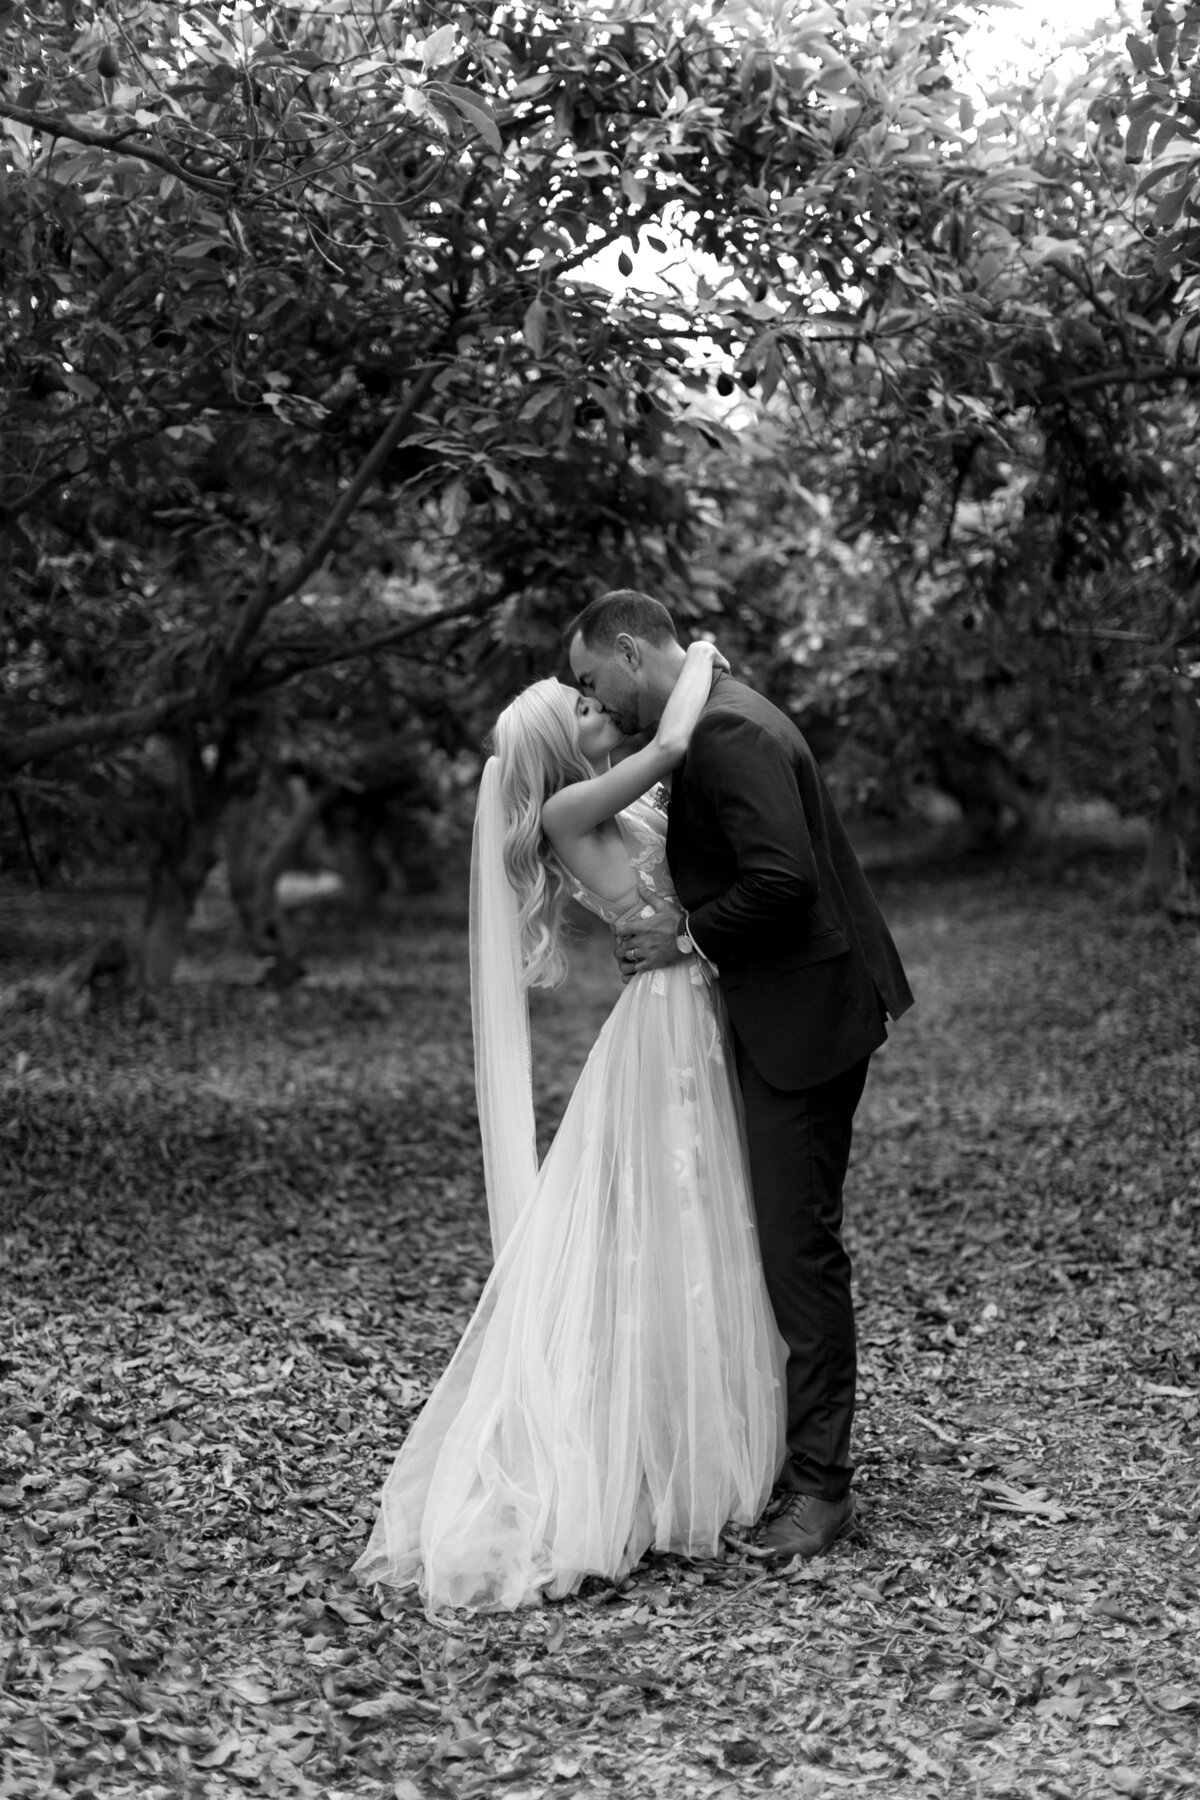 Bride and groom kissing surrounded by trees and nature